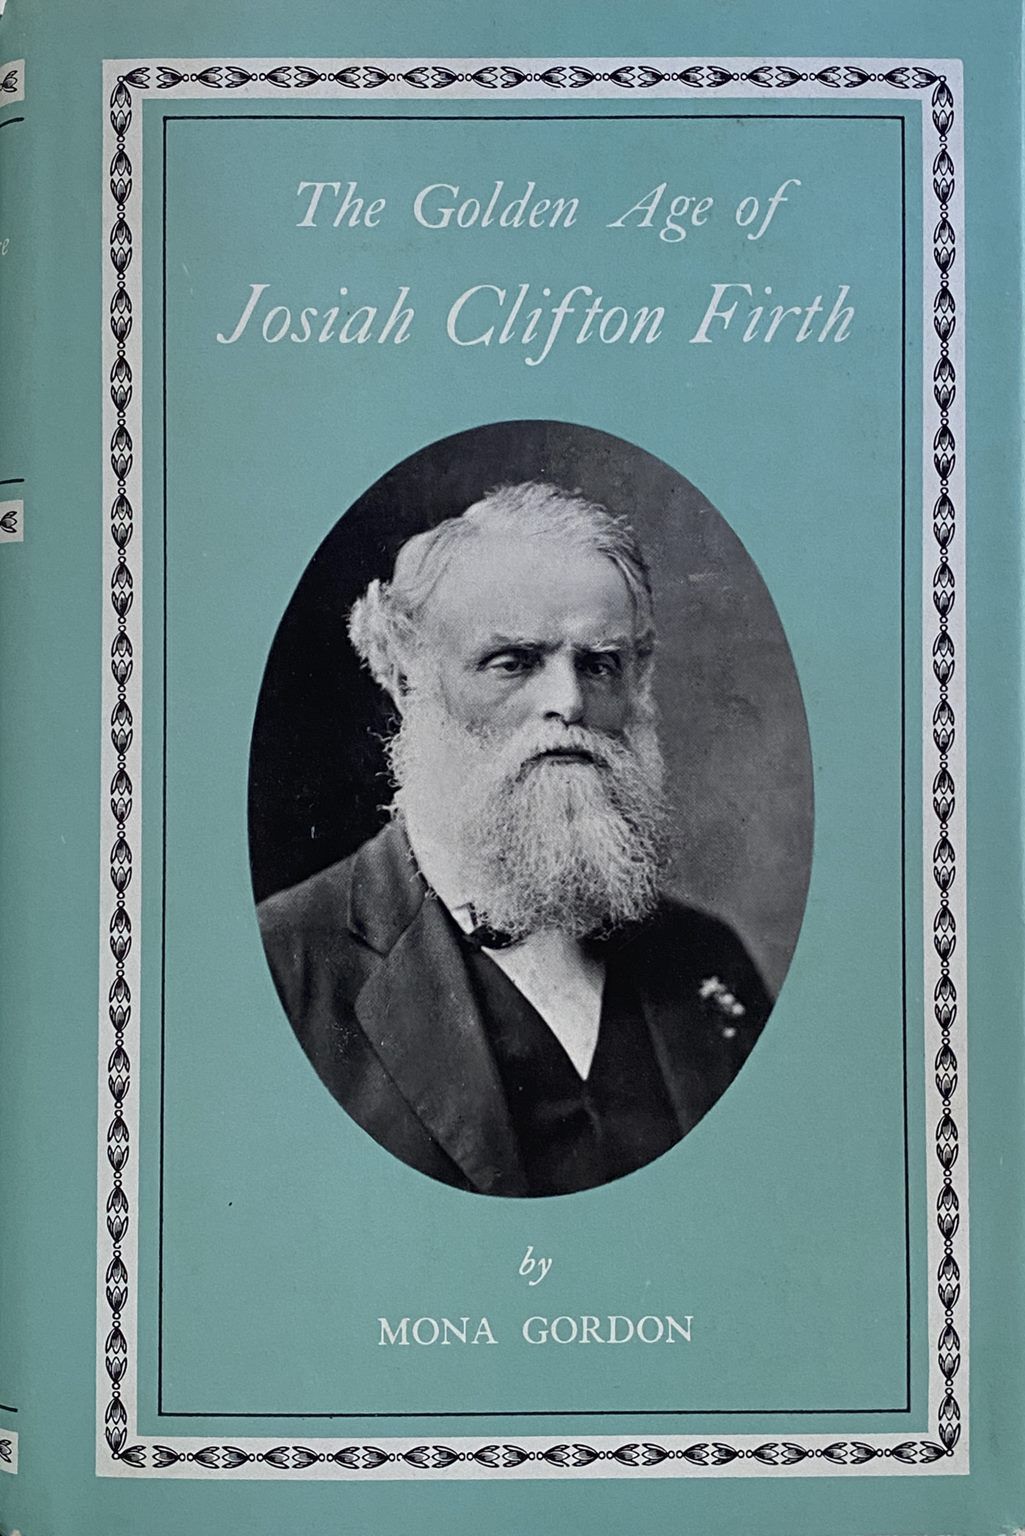 The Golden Age of Josiah Clifton Firth